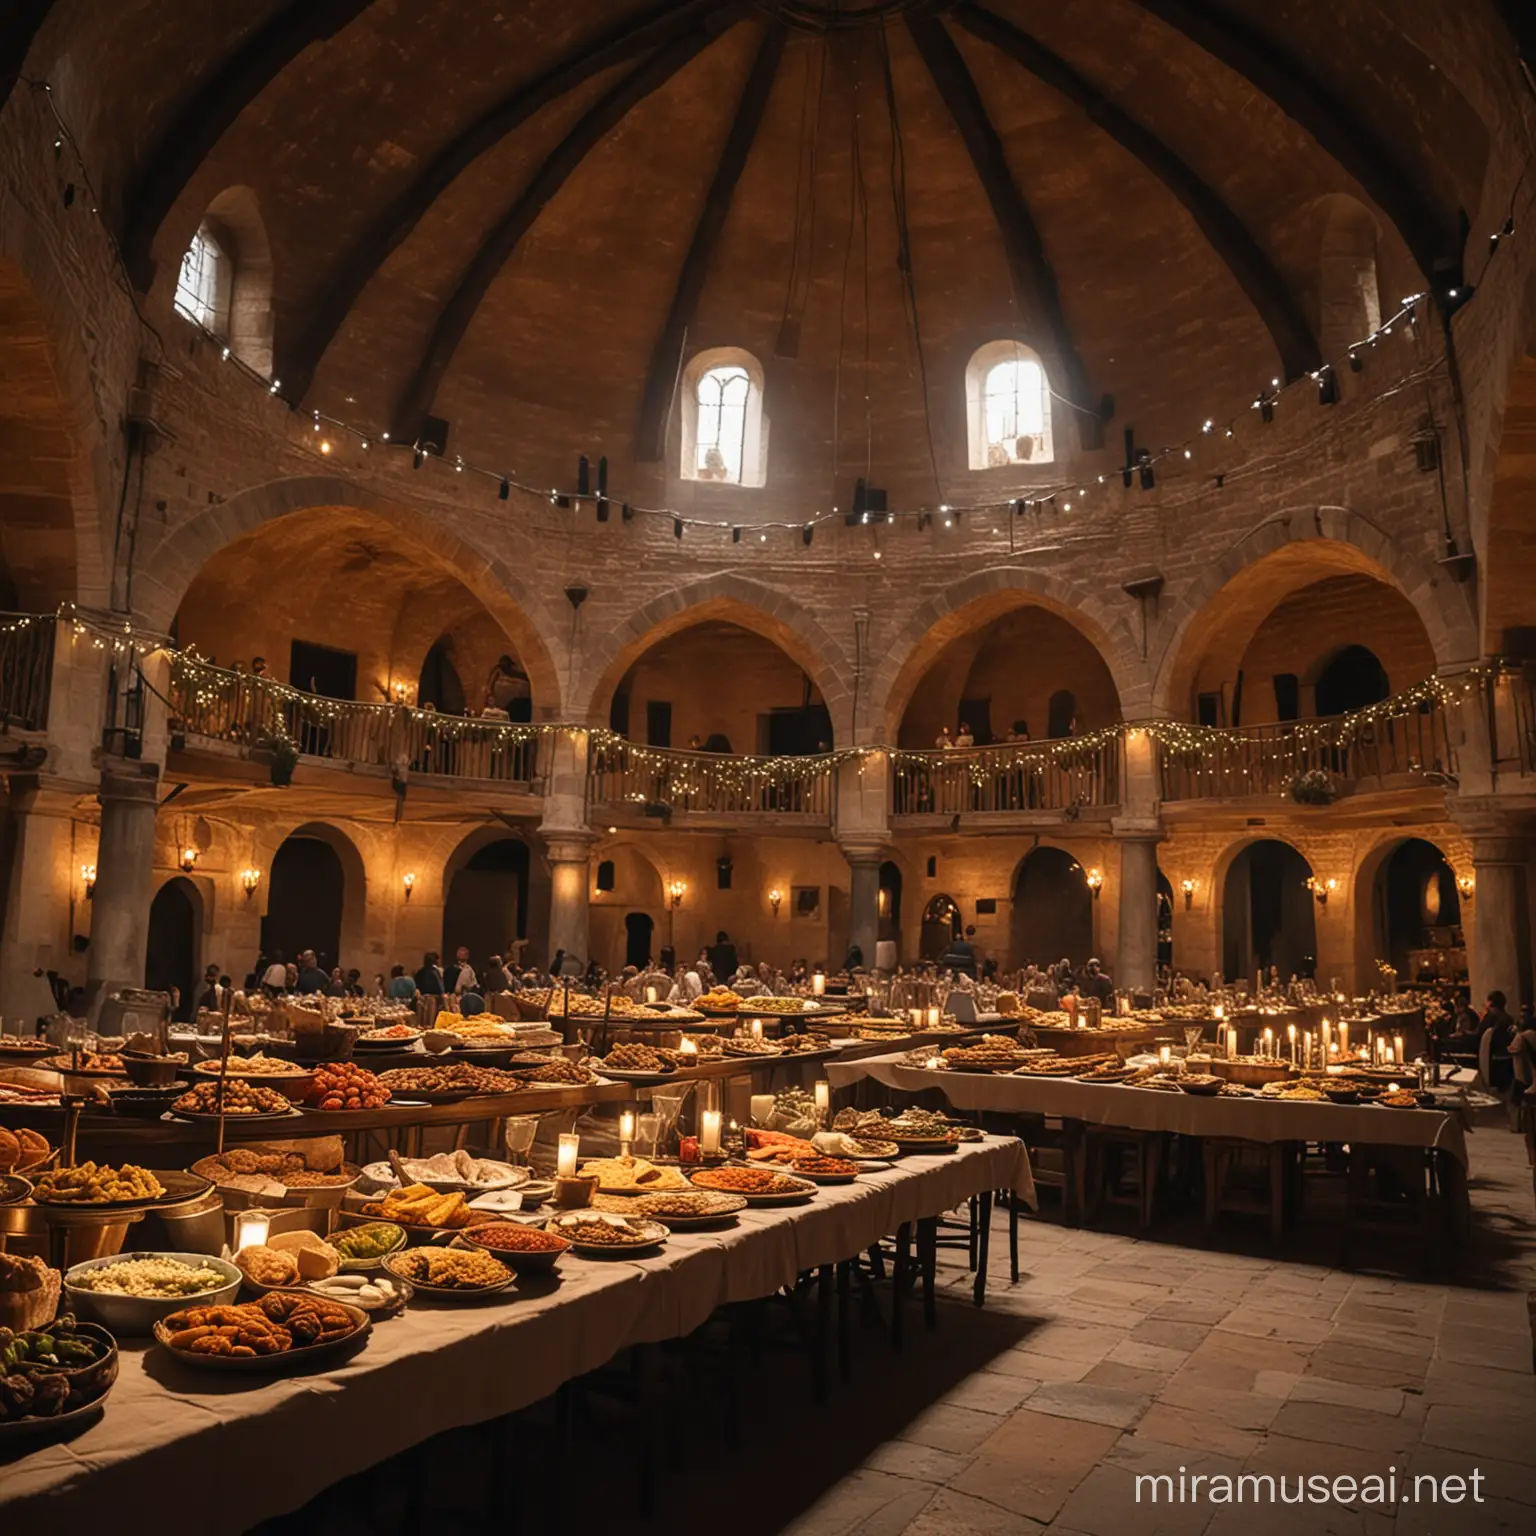 Photo Medieval Style: Close-up, a large, medieval, Caribbean dinner buffet in a roman style Dome. The scene takes place at night. Sigma 85mm F/1.4

